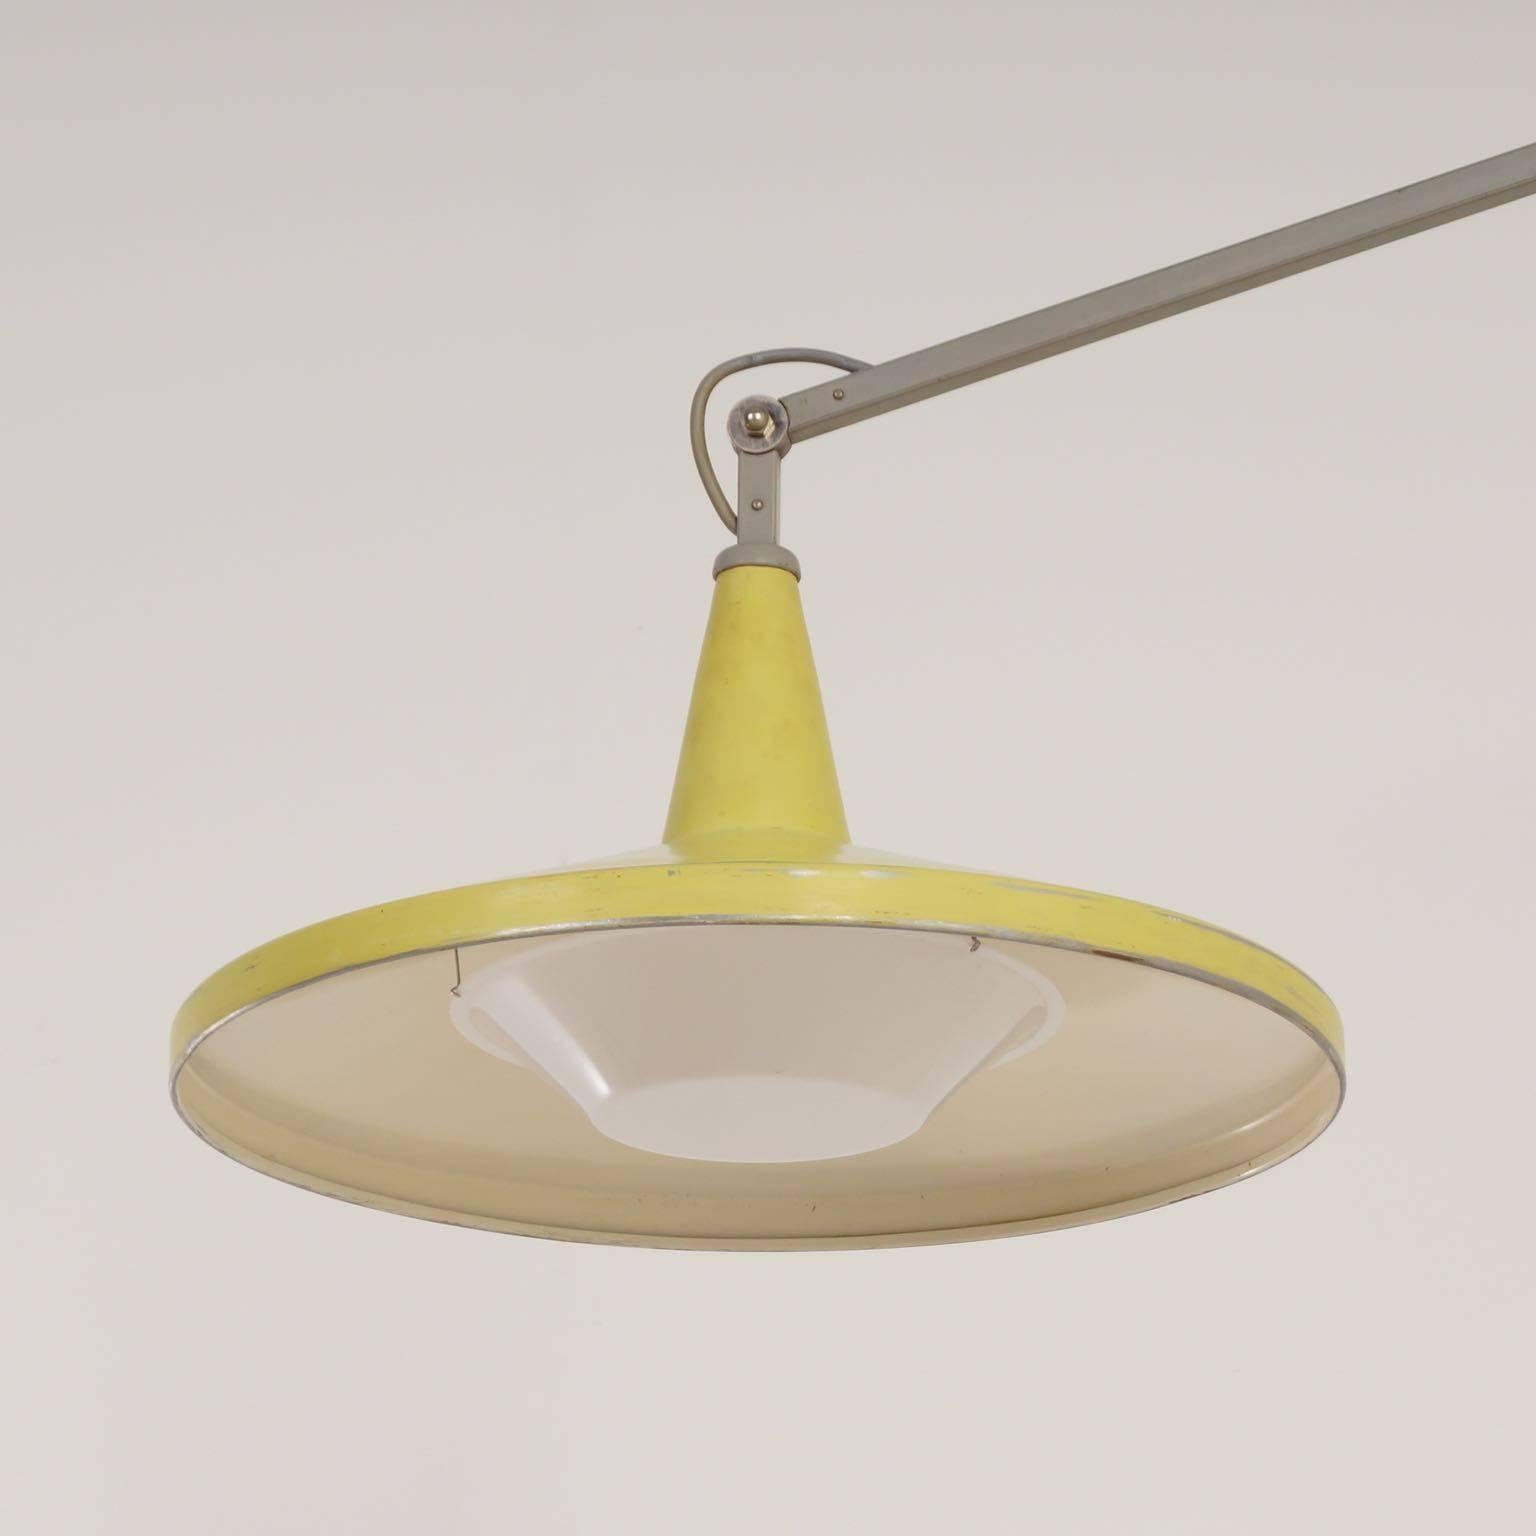 Mid-Century Modern Rare Yellow Panama Wall Lamp No. 4050 by W. Rietveld for Gispen, 1956 For Sale